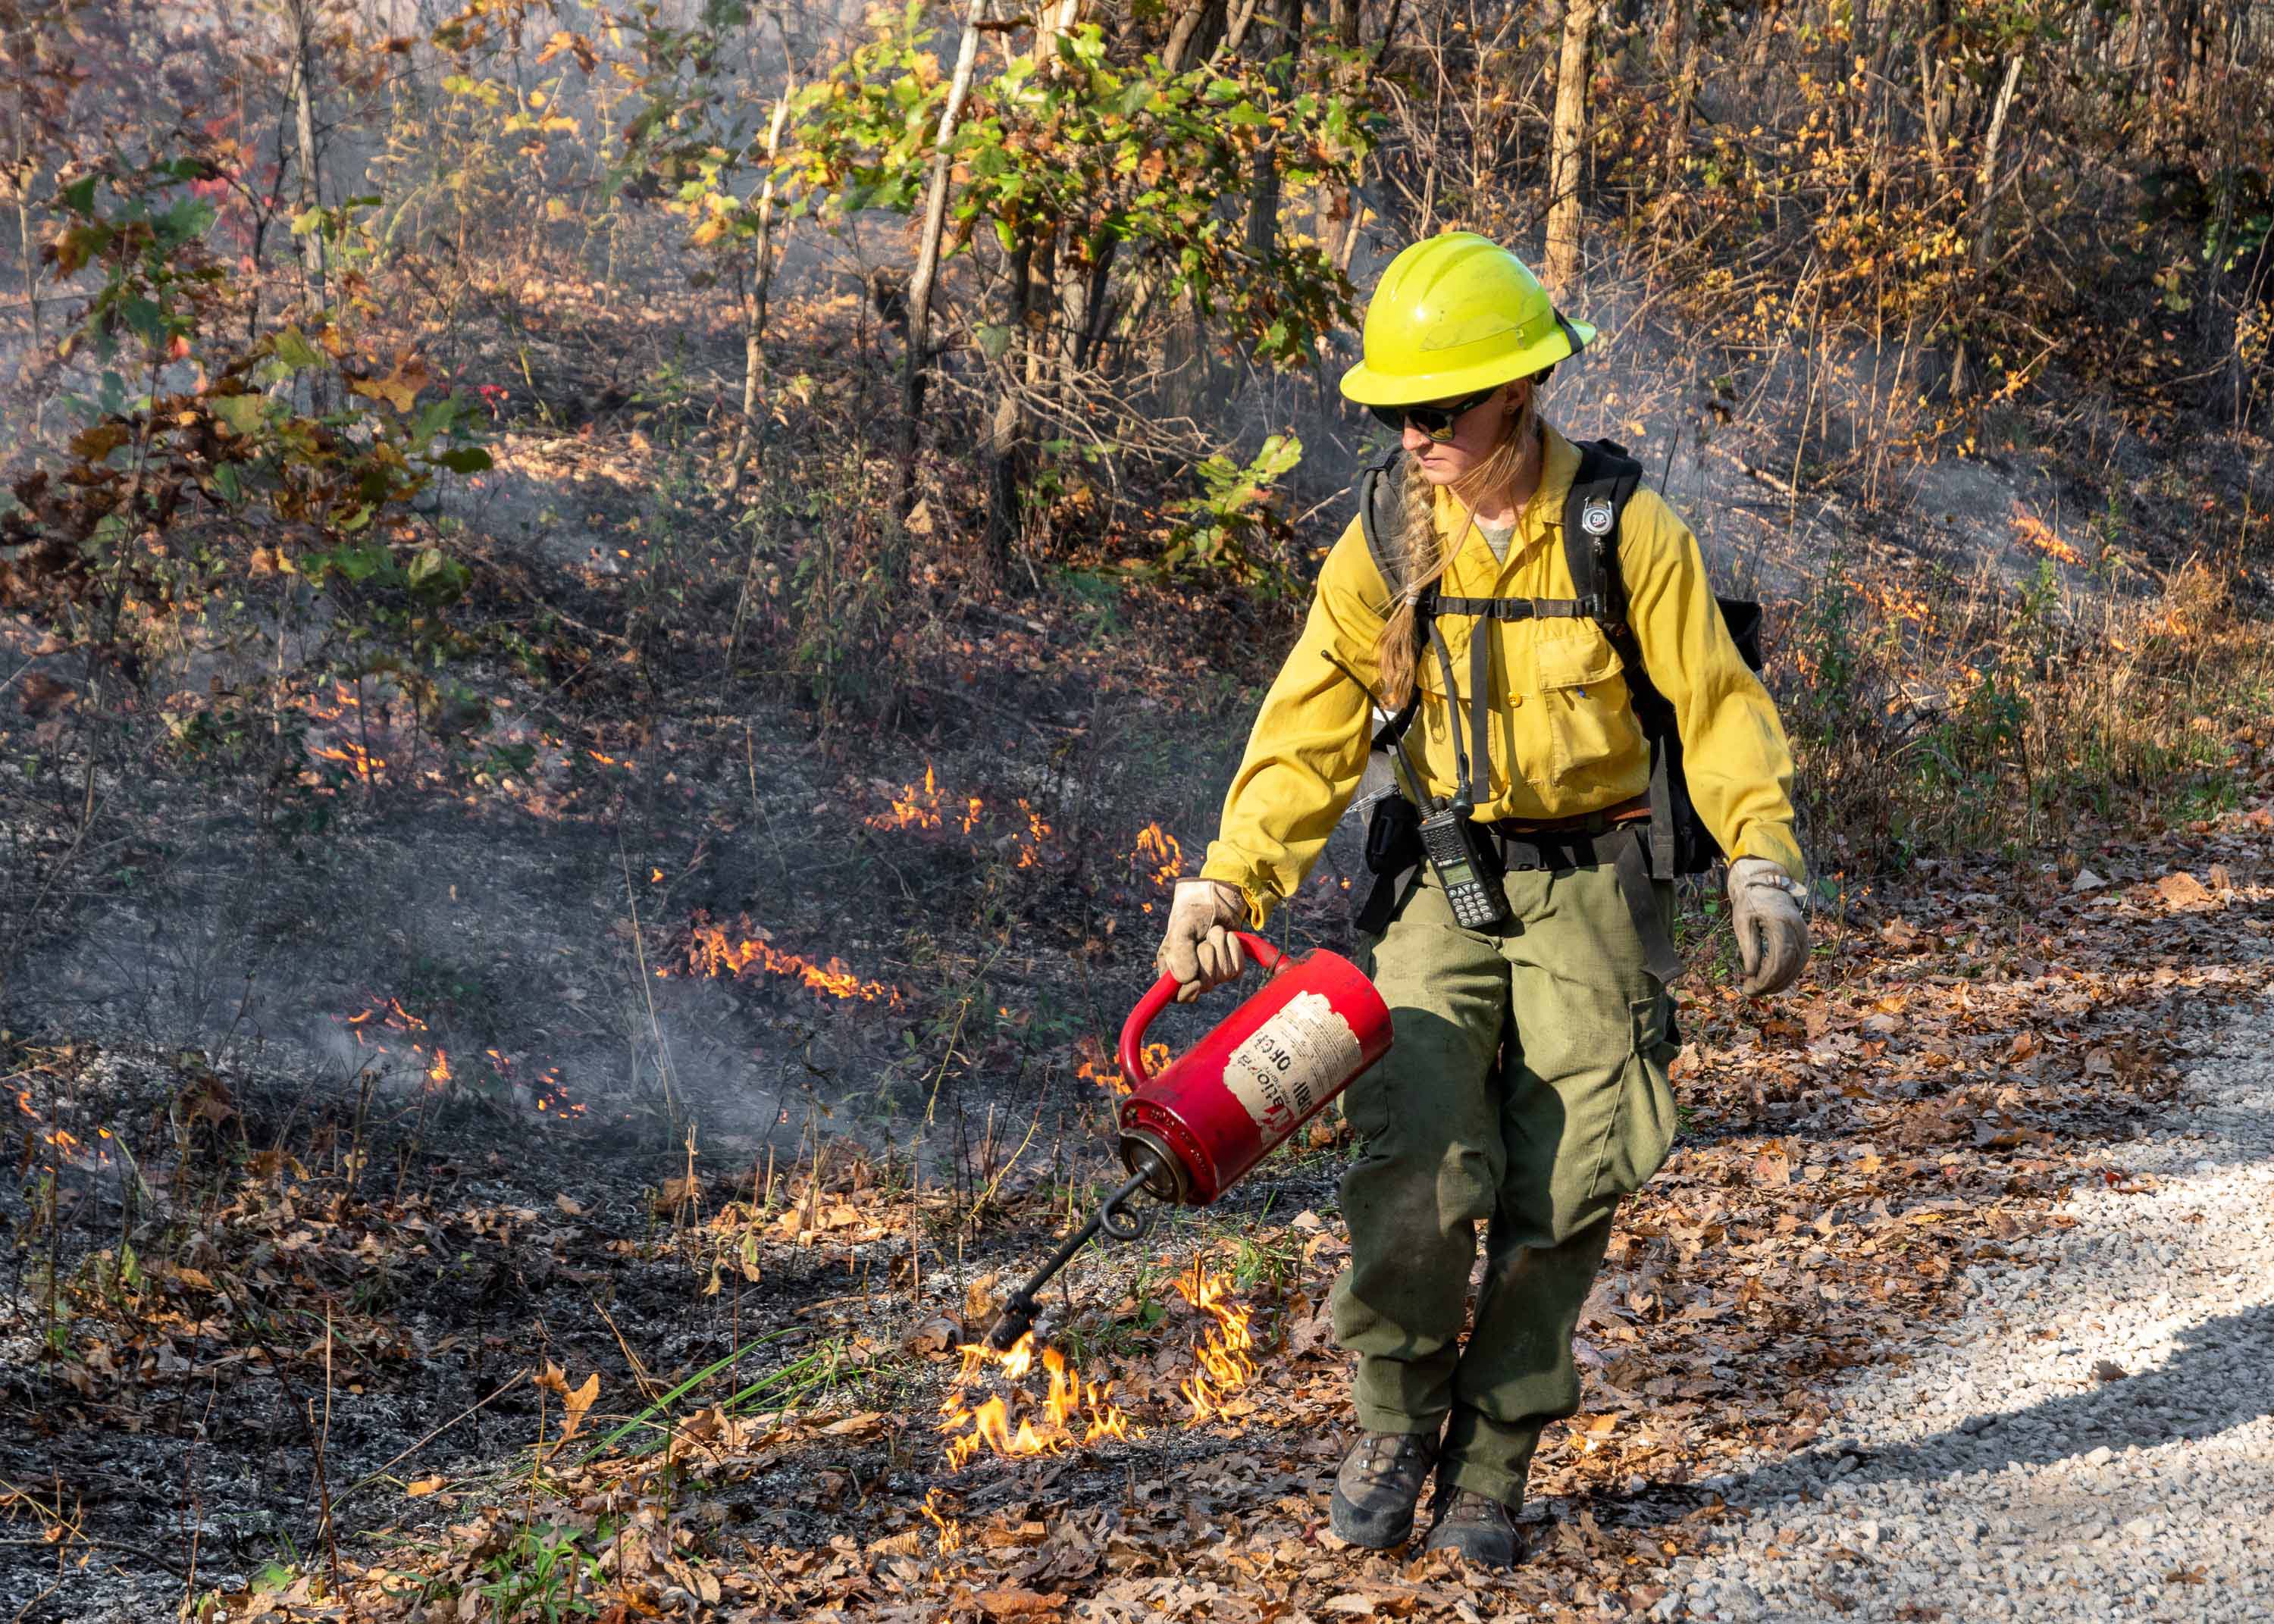 Employee in yellow and green firefighting gear uses a drip torch to conduct a prescribed burn.